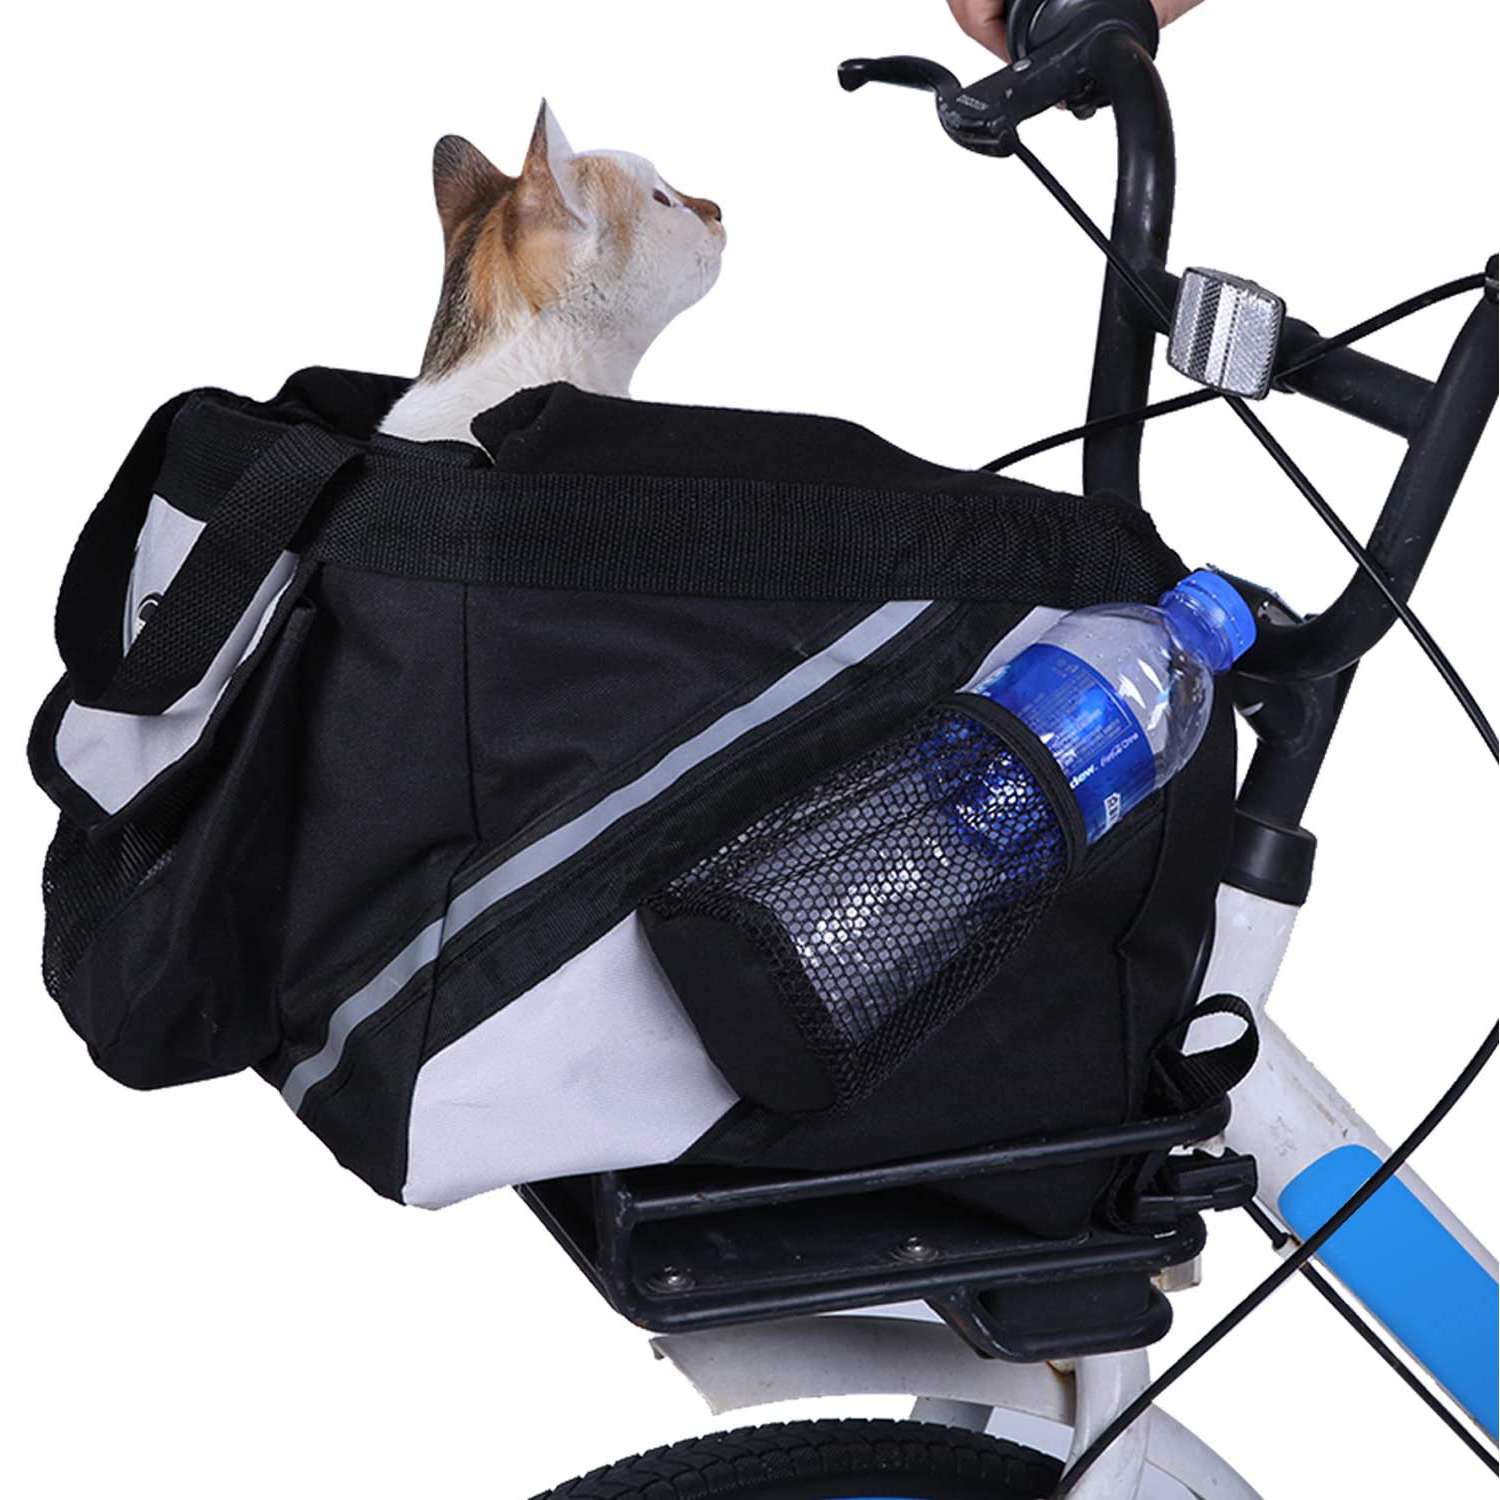 Comfy & Safety Bike Detachable Front Bag for Dogs and Cats Suitable for Outdoor Cycling Shopping Travel Zhuhaixmy Pet Carrier Bicycle Basket Bag